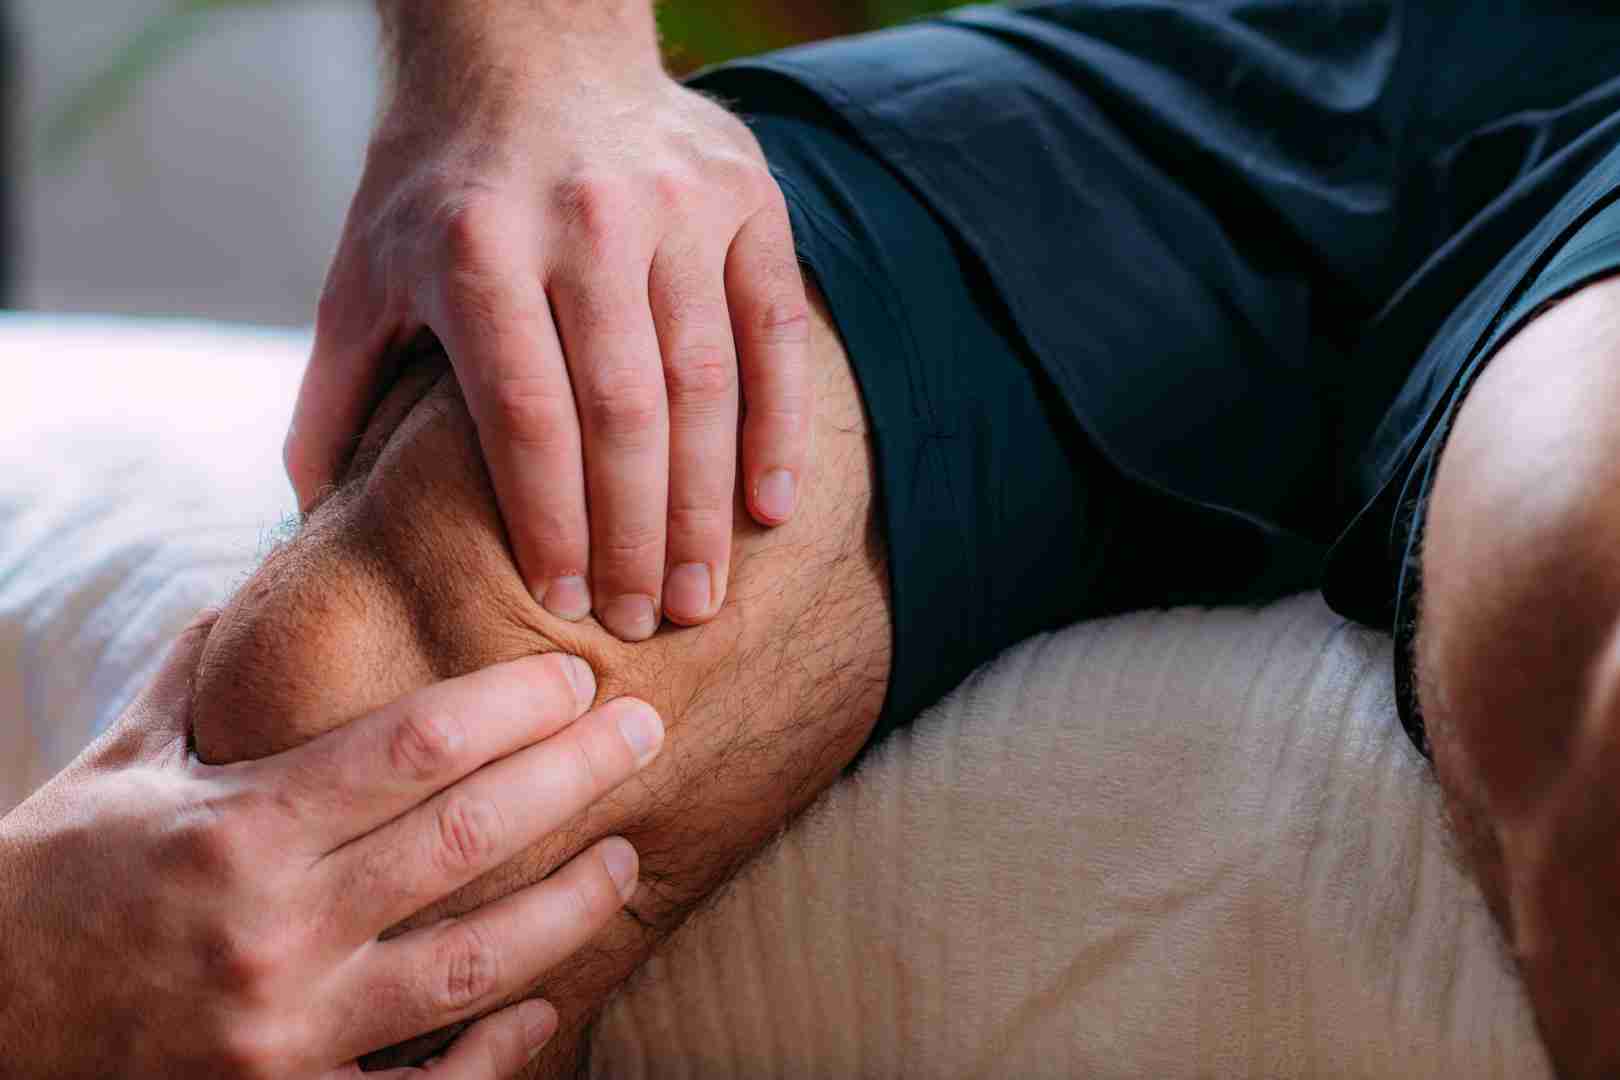 A close-up photo of a person receiving a knee massage. A pair of hands is seen applying pressure and massaging the knee area, possibly indicating physiotherapy or relief for knee pain, as one might experience at Austin Manual Therapy Associates. The person being massaged is wearing shorts.